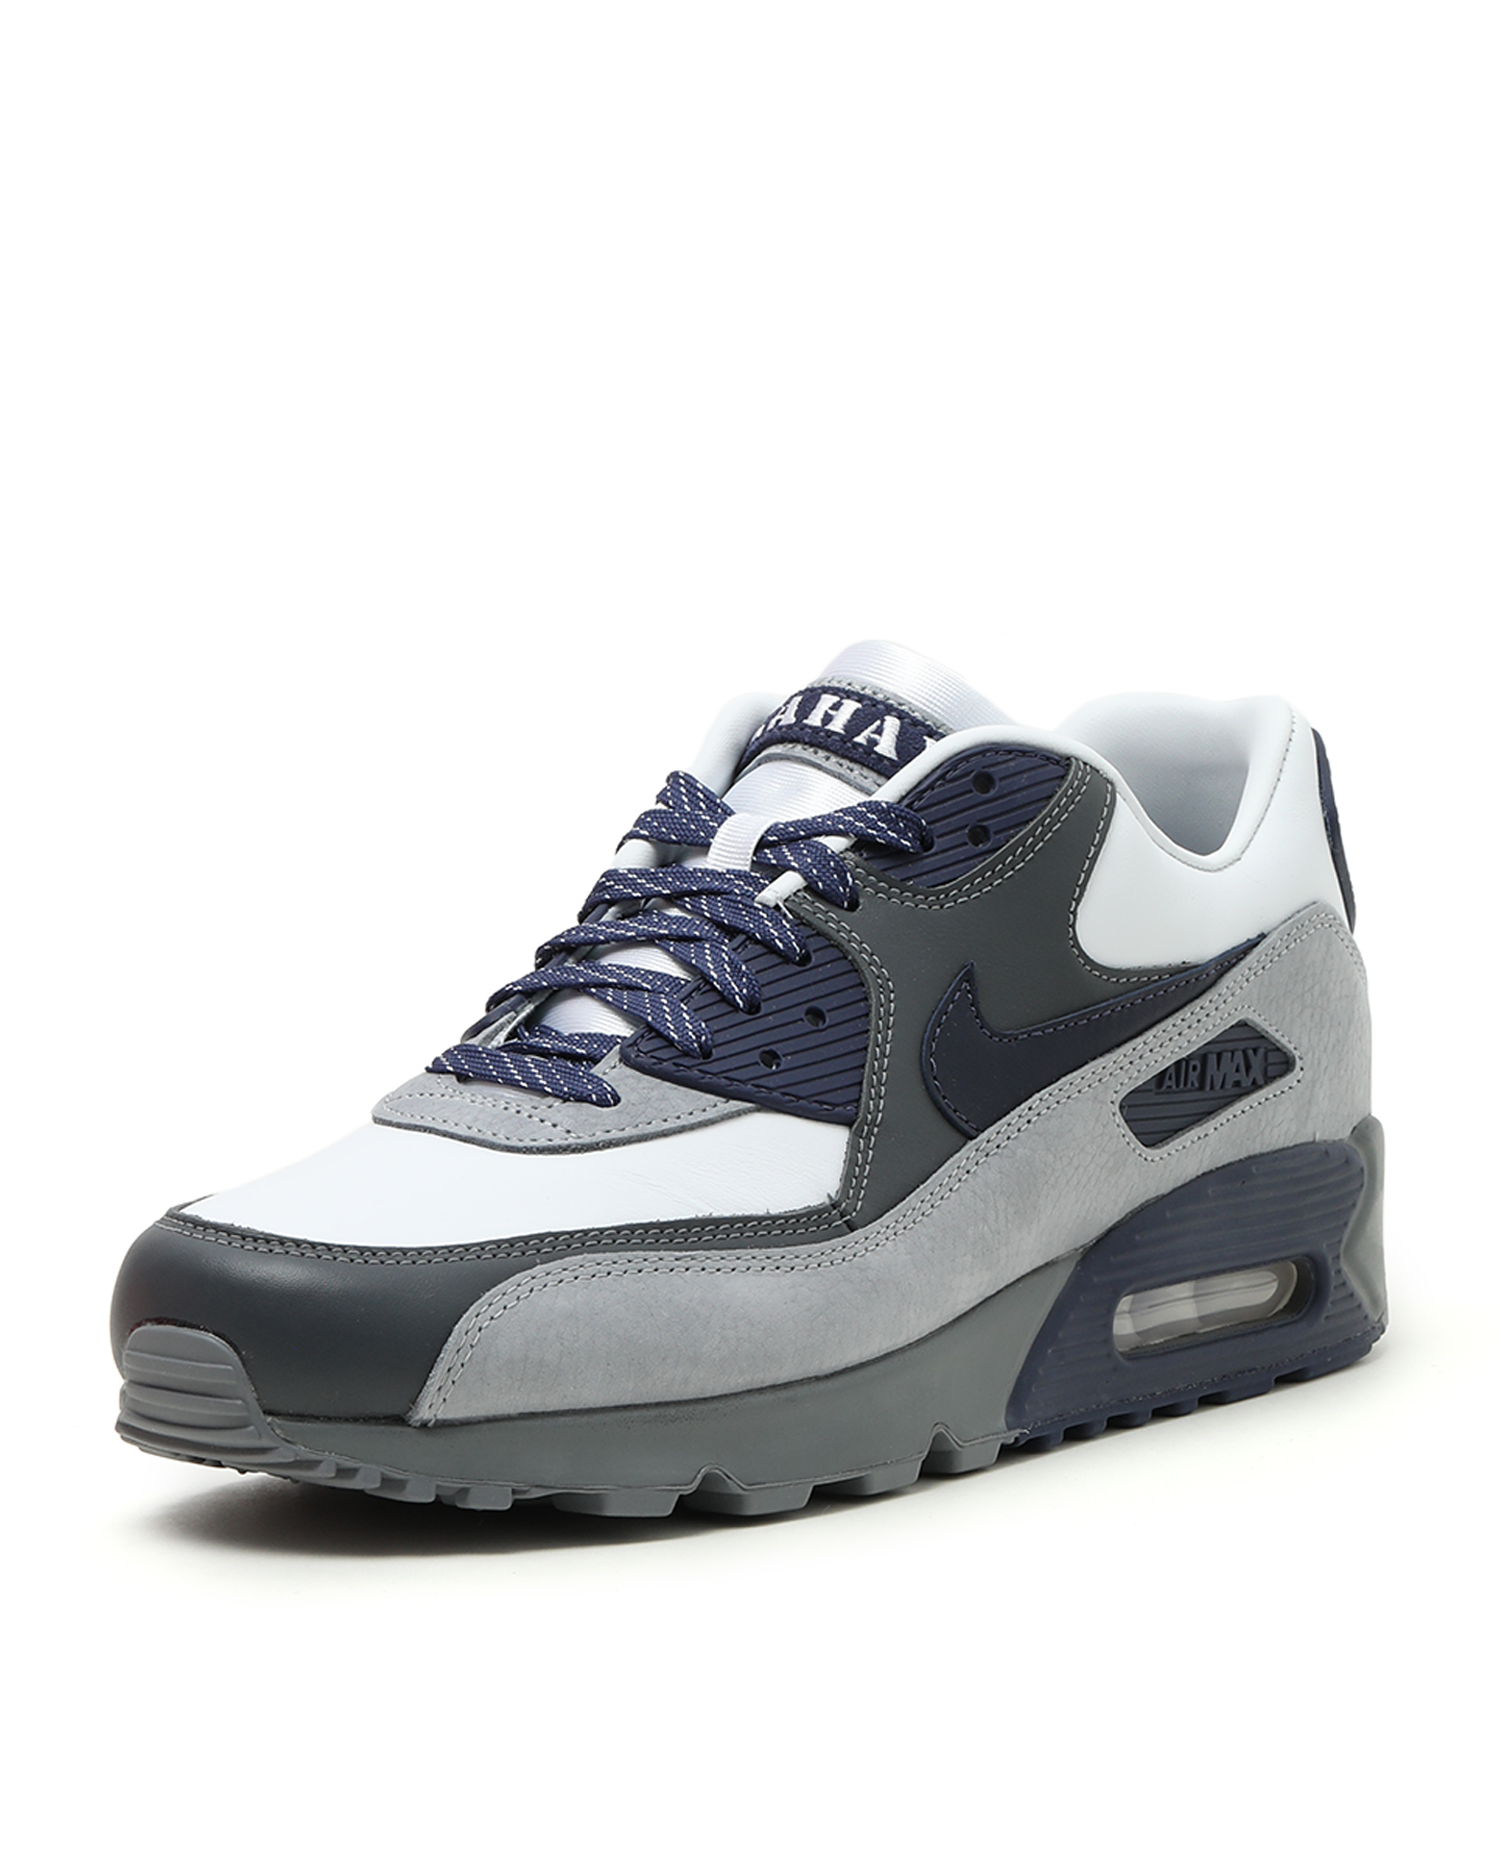 nike air max 90 next day delivery